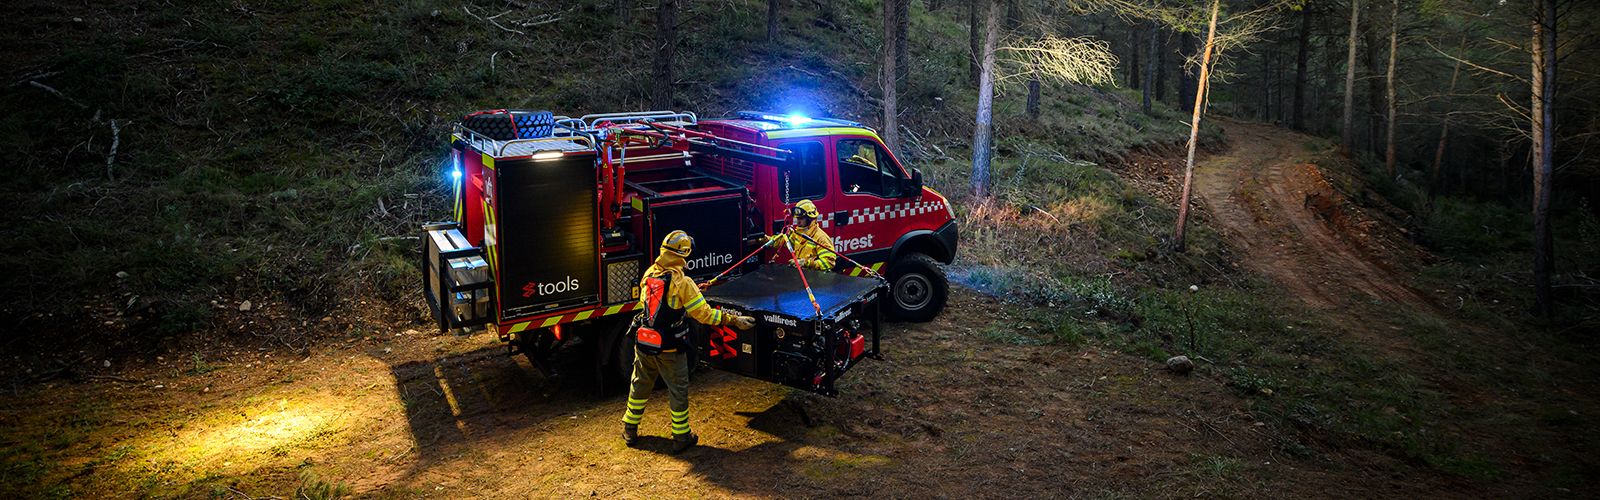 The story behind the Tactical Unit, a multifunctional module designed to  face any type of emergency in a Wildland fire